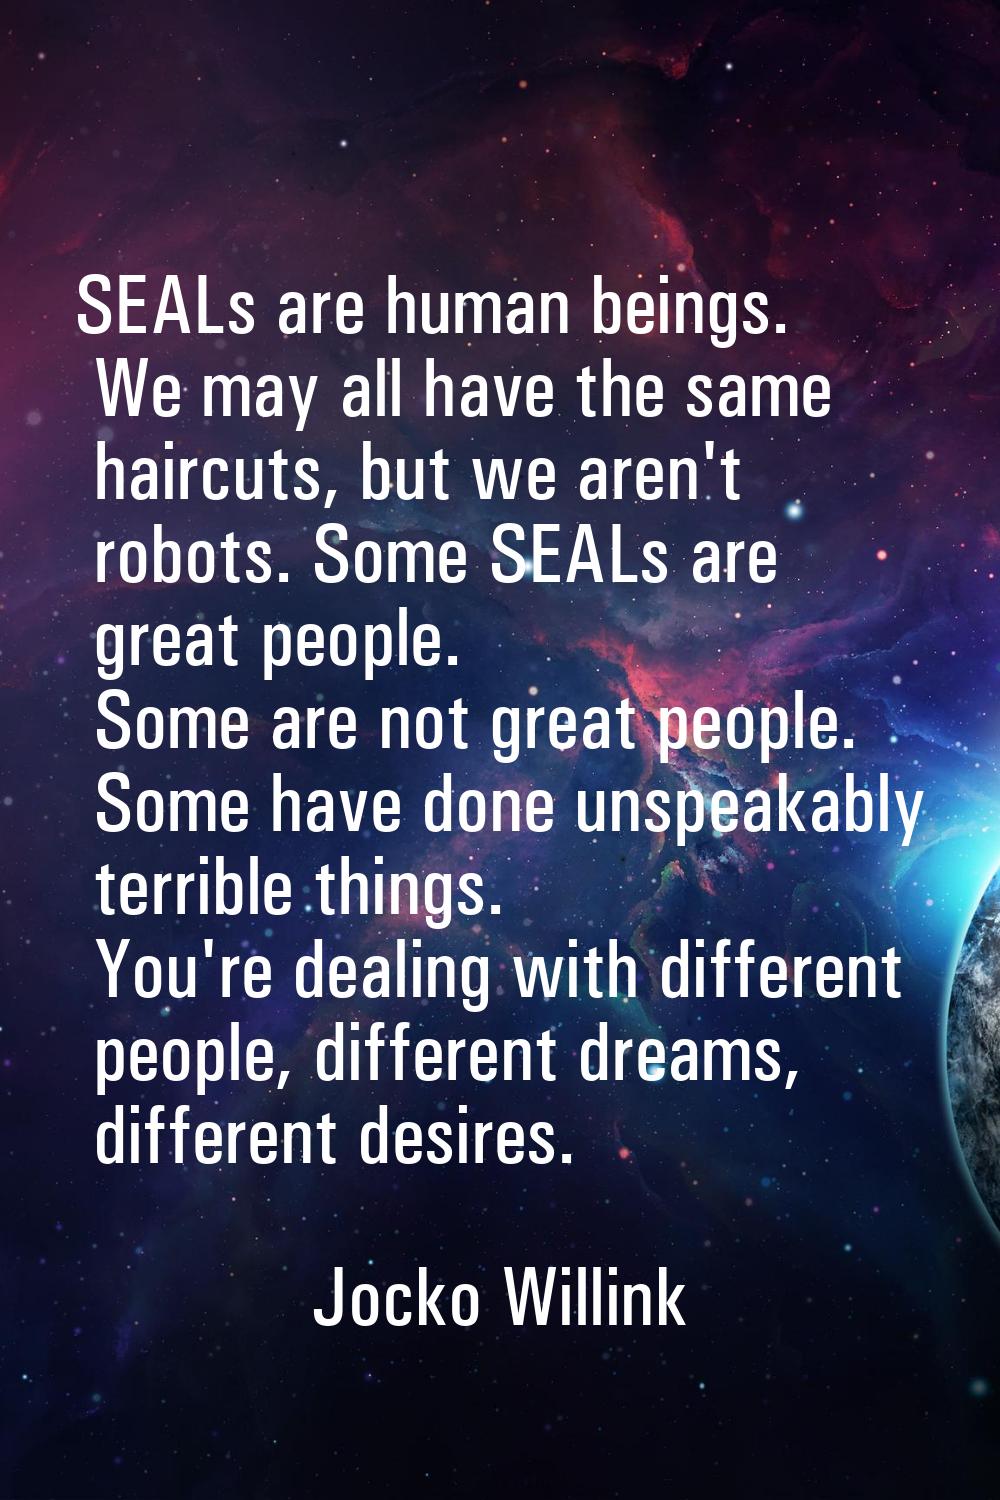 SEALs are human beings. We may all have the same haircuts, but we aren't robots. Some SEALs are gre